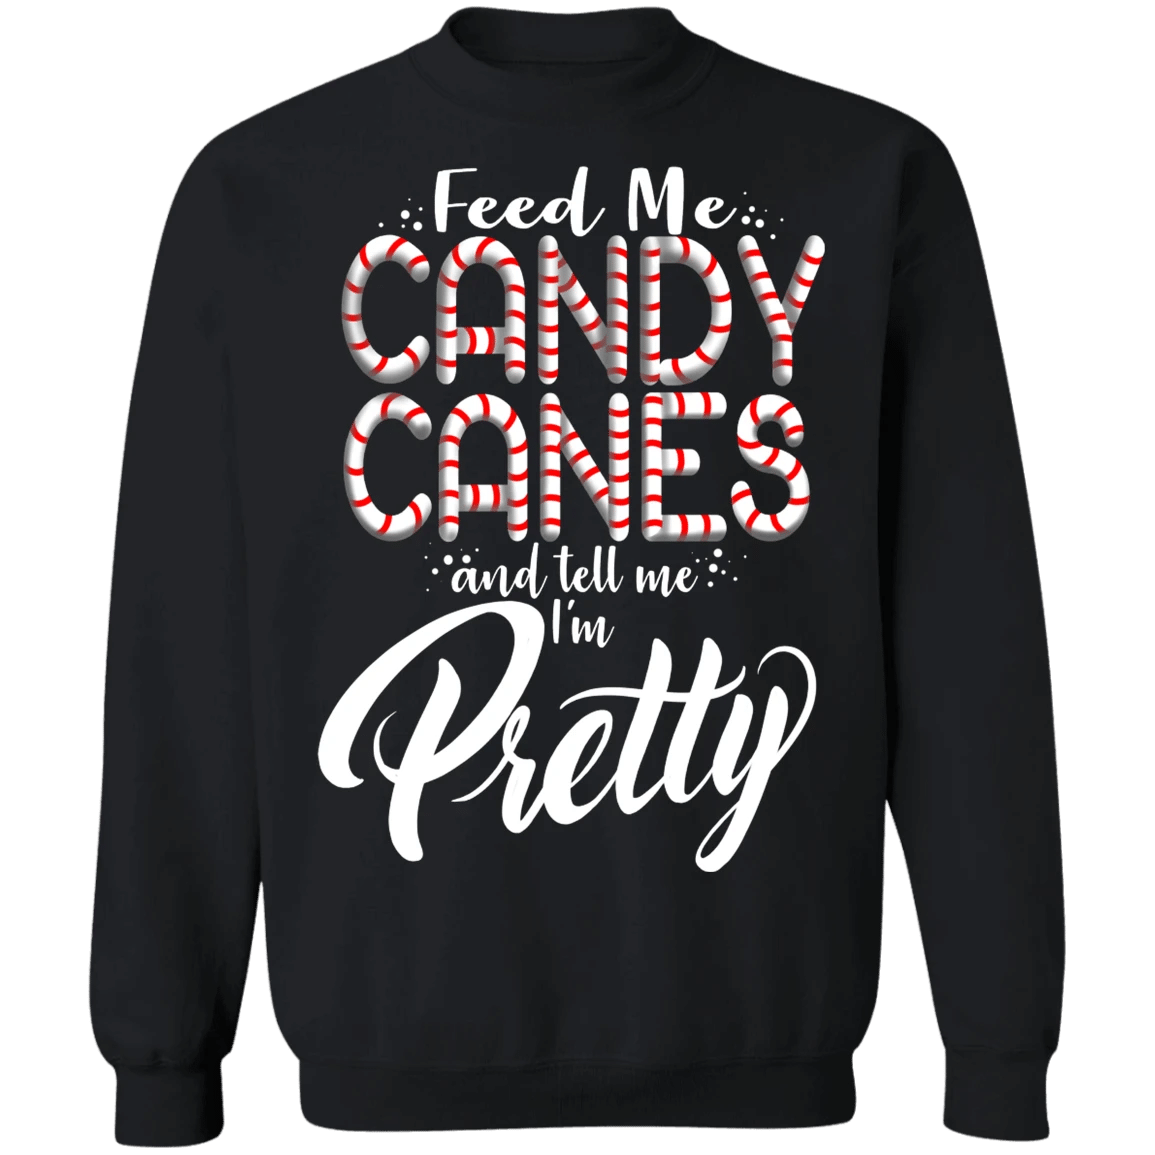 Feed Me Candy Canes And Tell Me I'm Pretty Christmas Sweatshirt Style: Sweatshirt, Color: Black